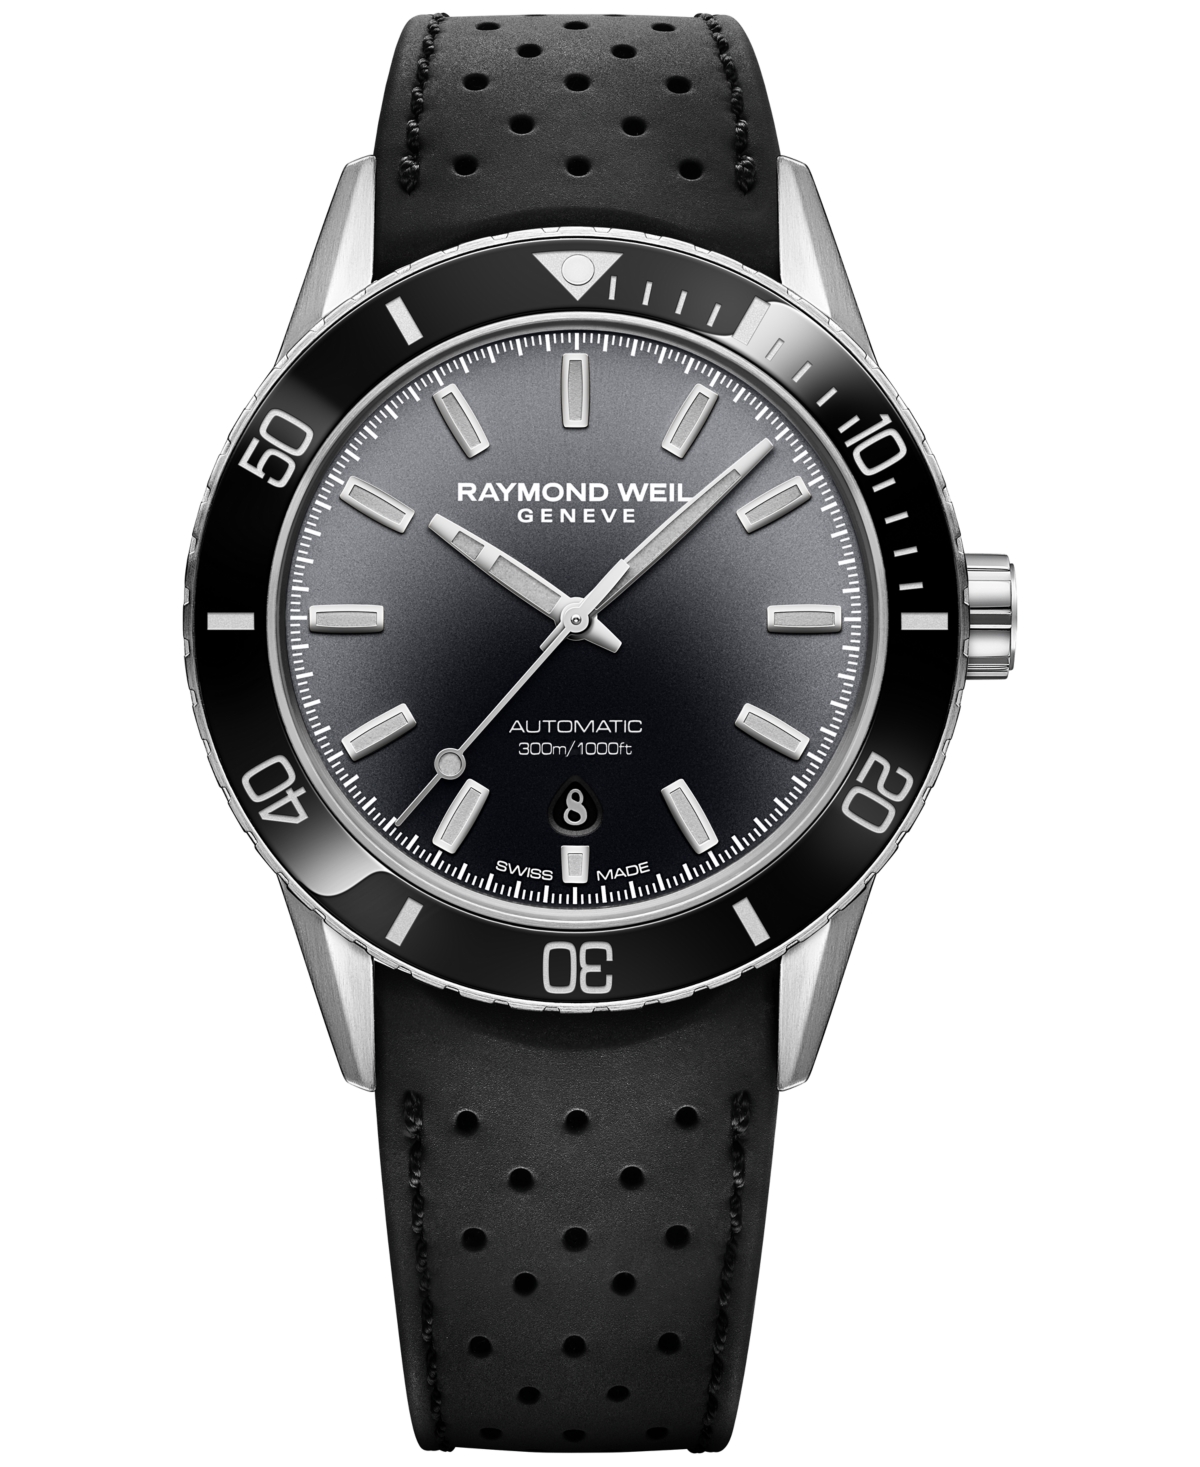 Raymond Weil Men's Swiss Automatic Freelancer Diver Black Perforated Rubber Strap Watch 43mm